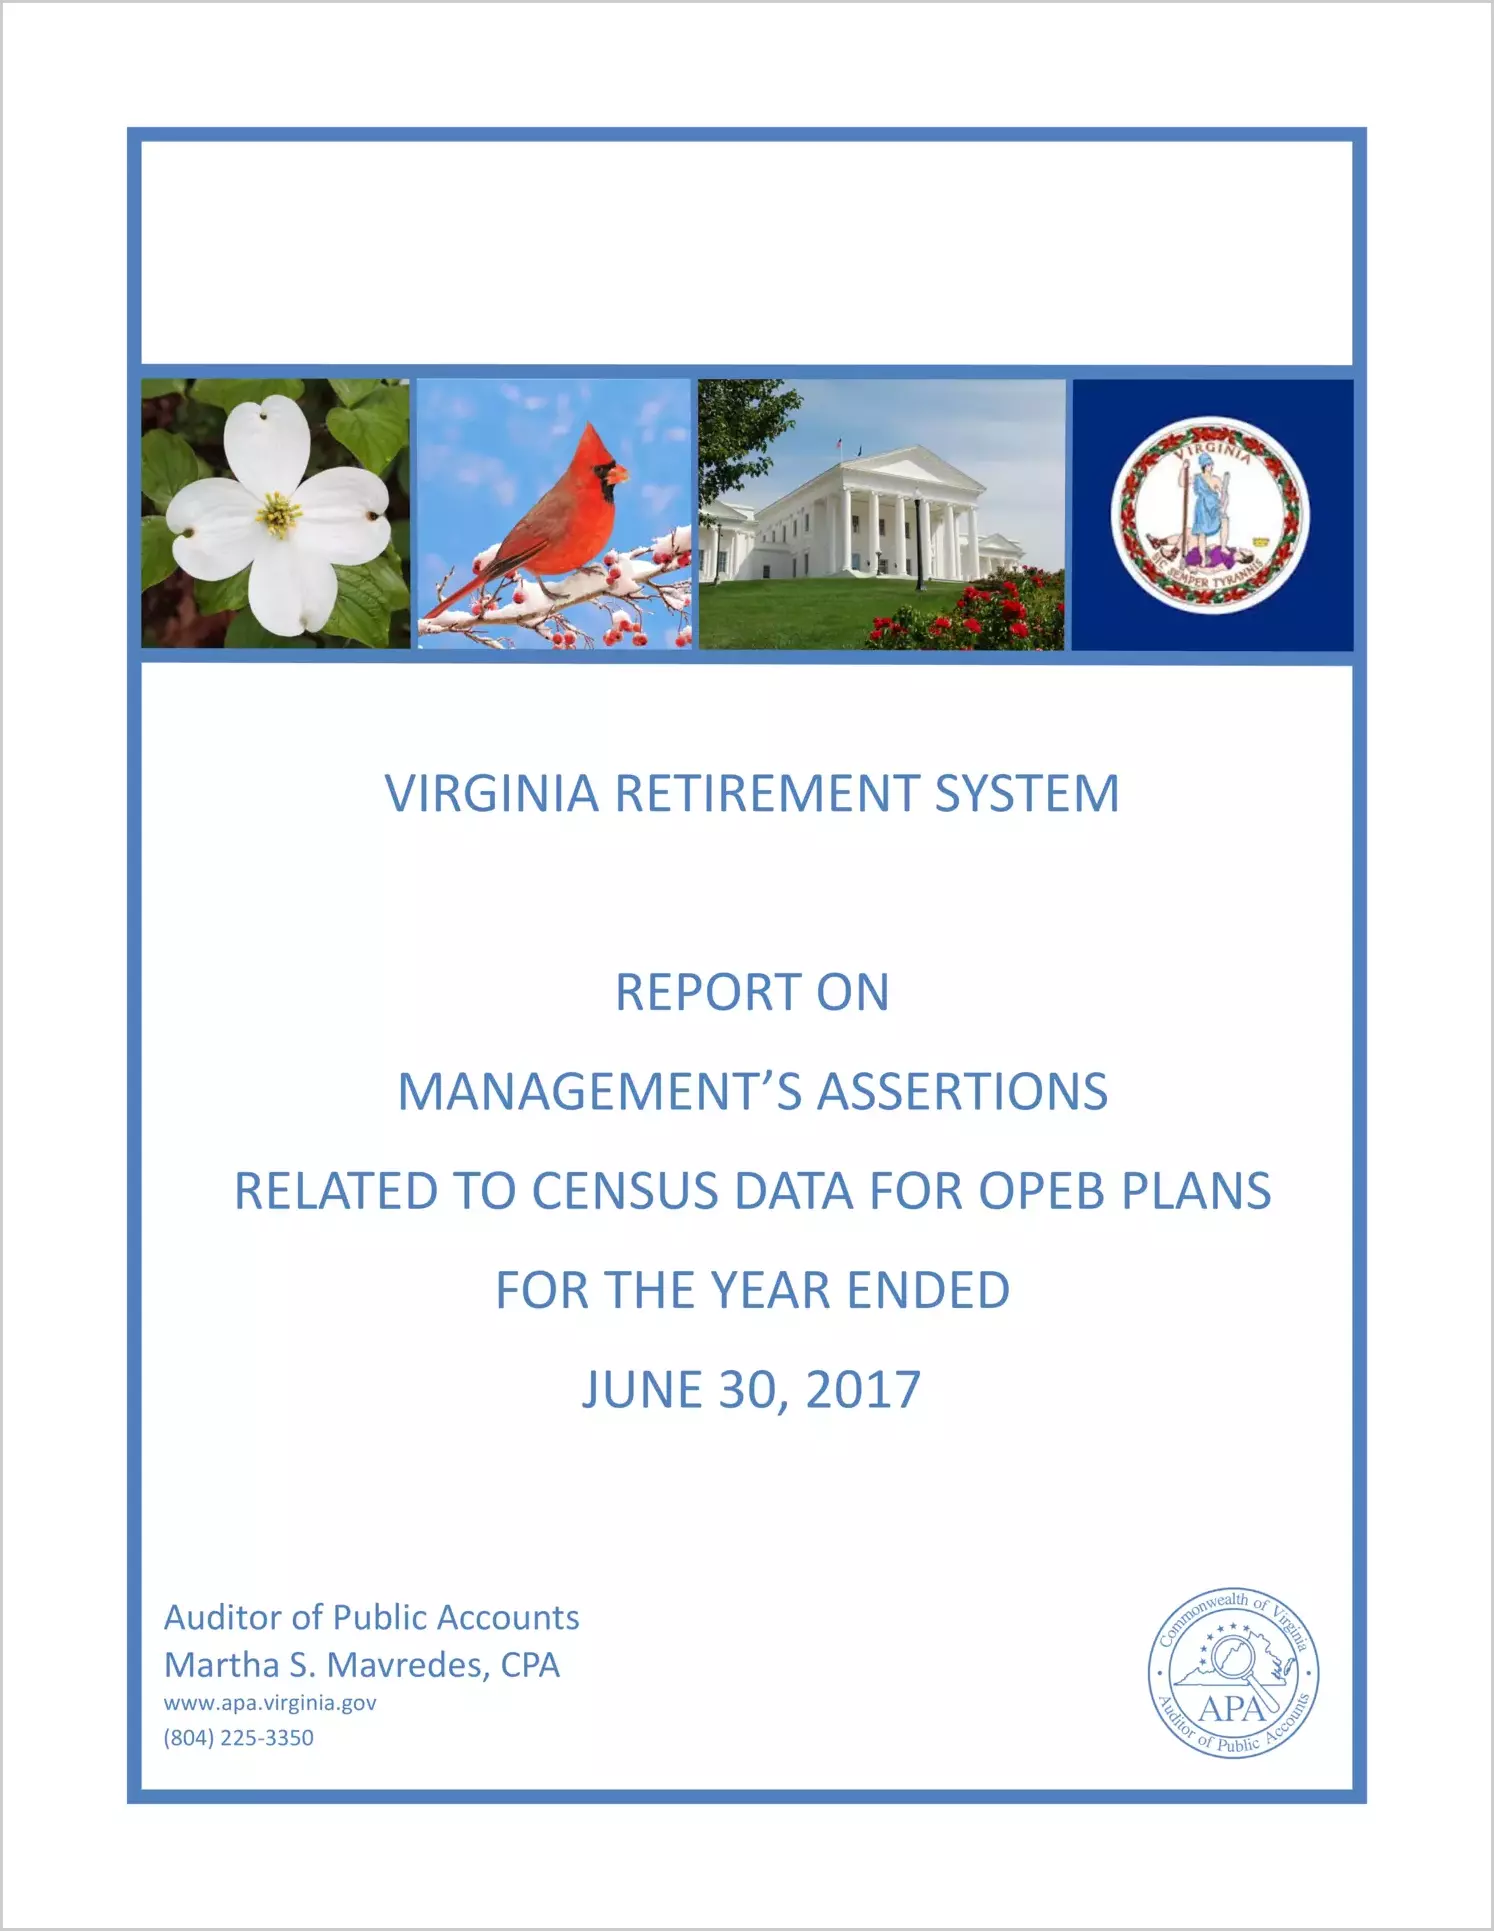 Virginia Retirement System Management's Assertions Related to Census Data for OPEB Plans for the year ended June 30, 2017